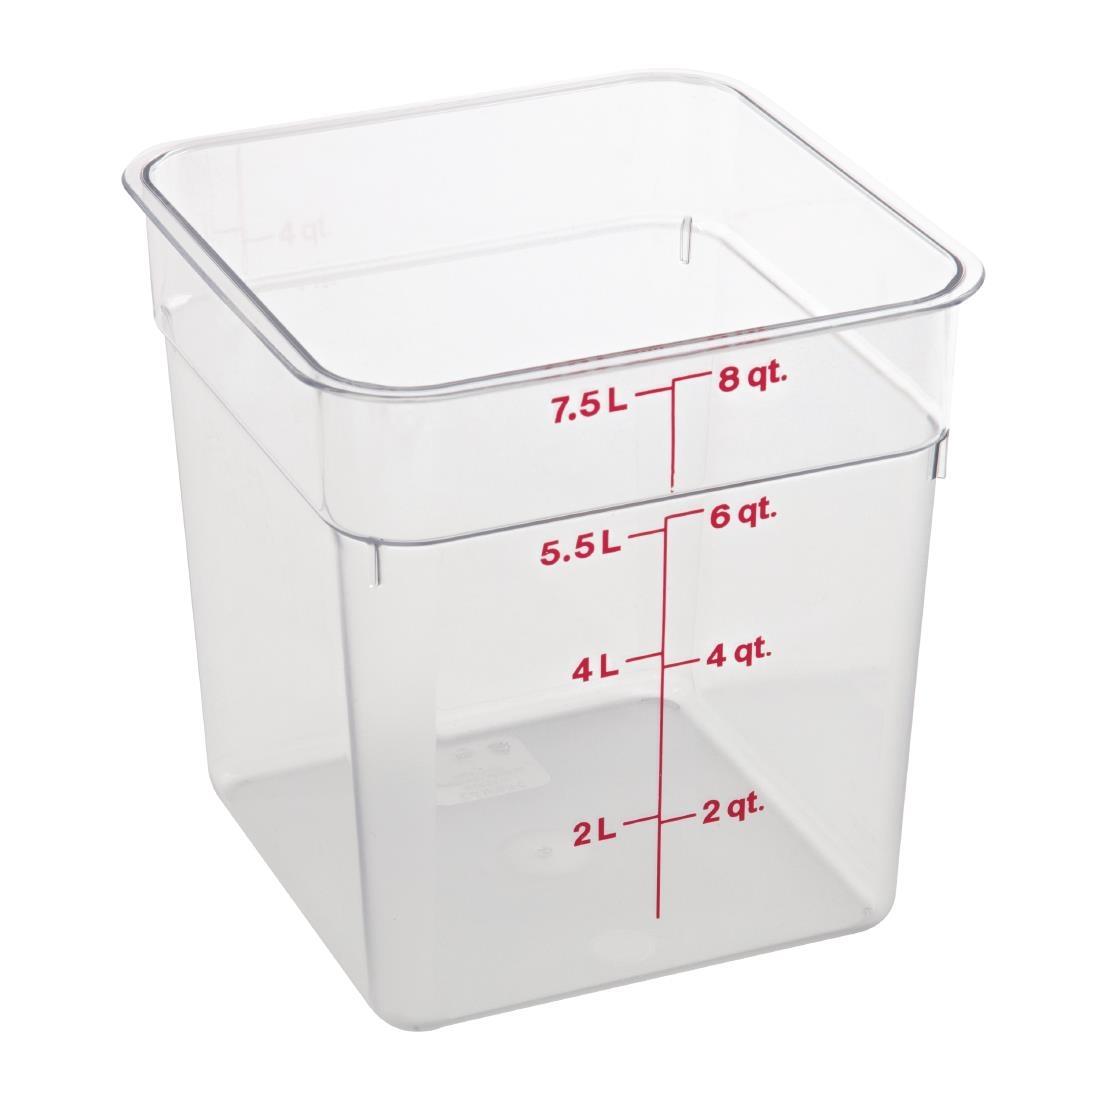 Cambro Square Polycarbonate Food Storage Container 7.6 Ltr - DB011  - 2